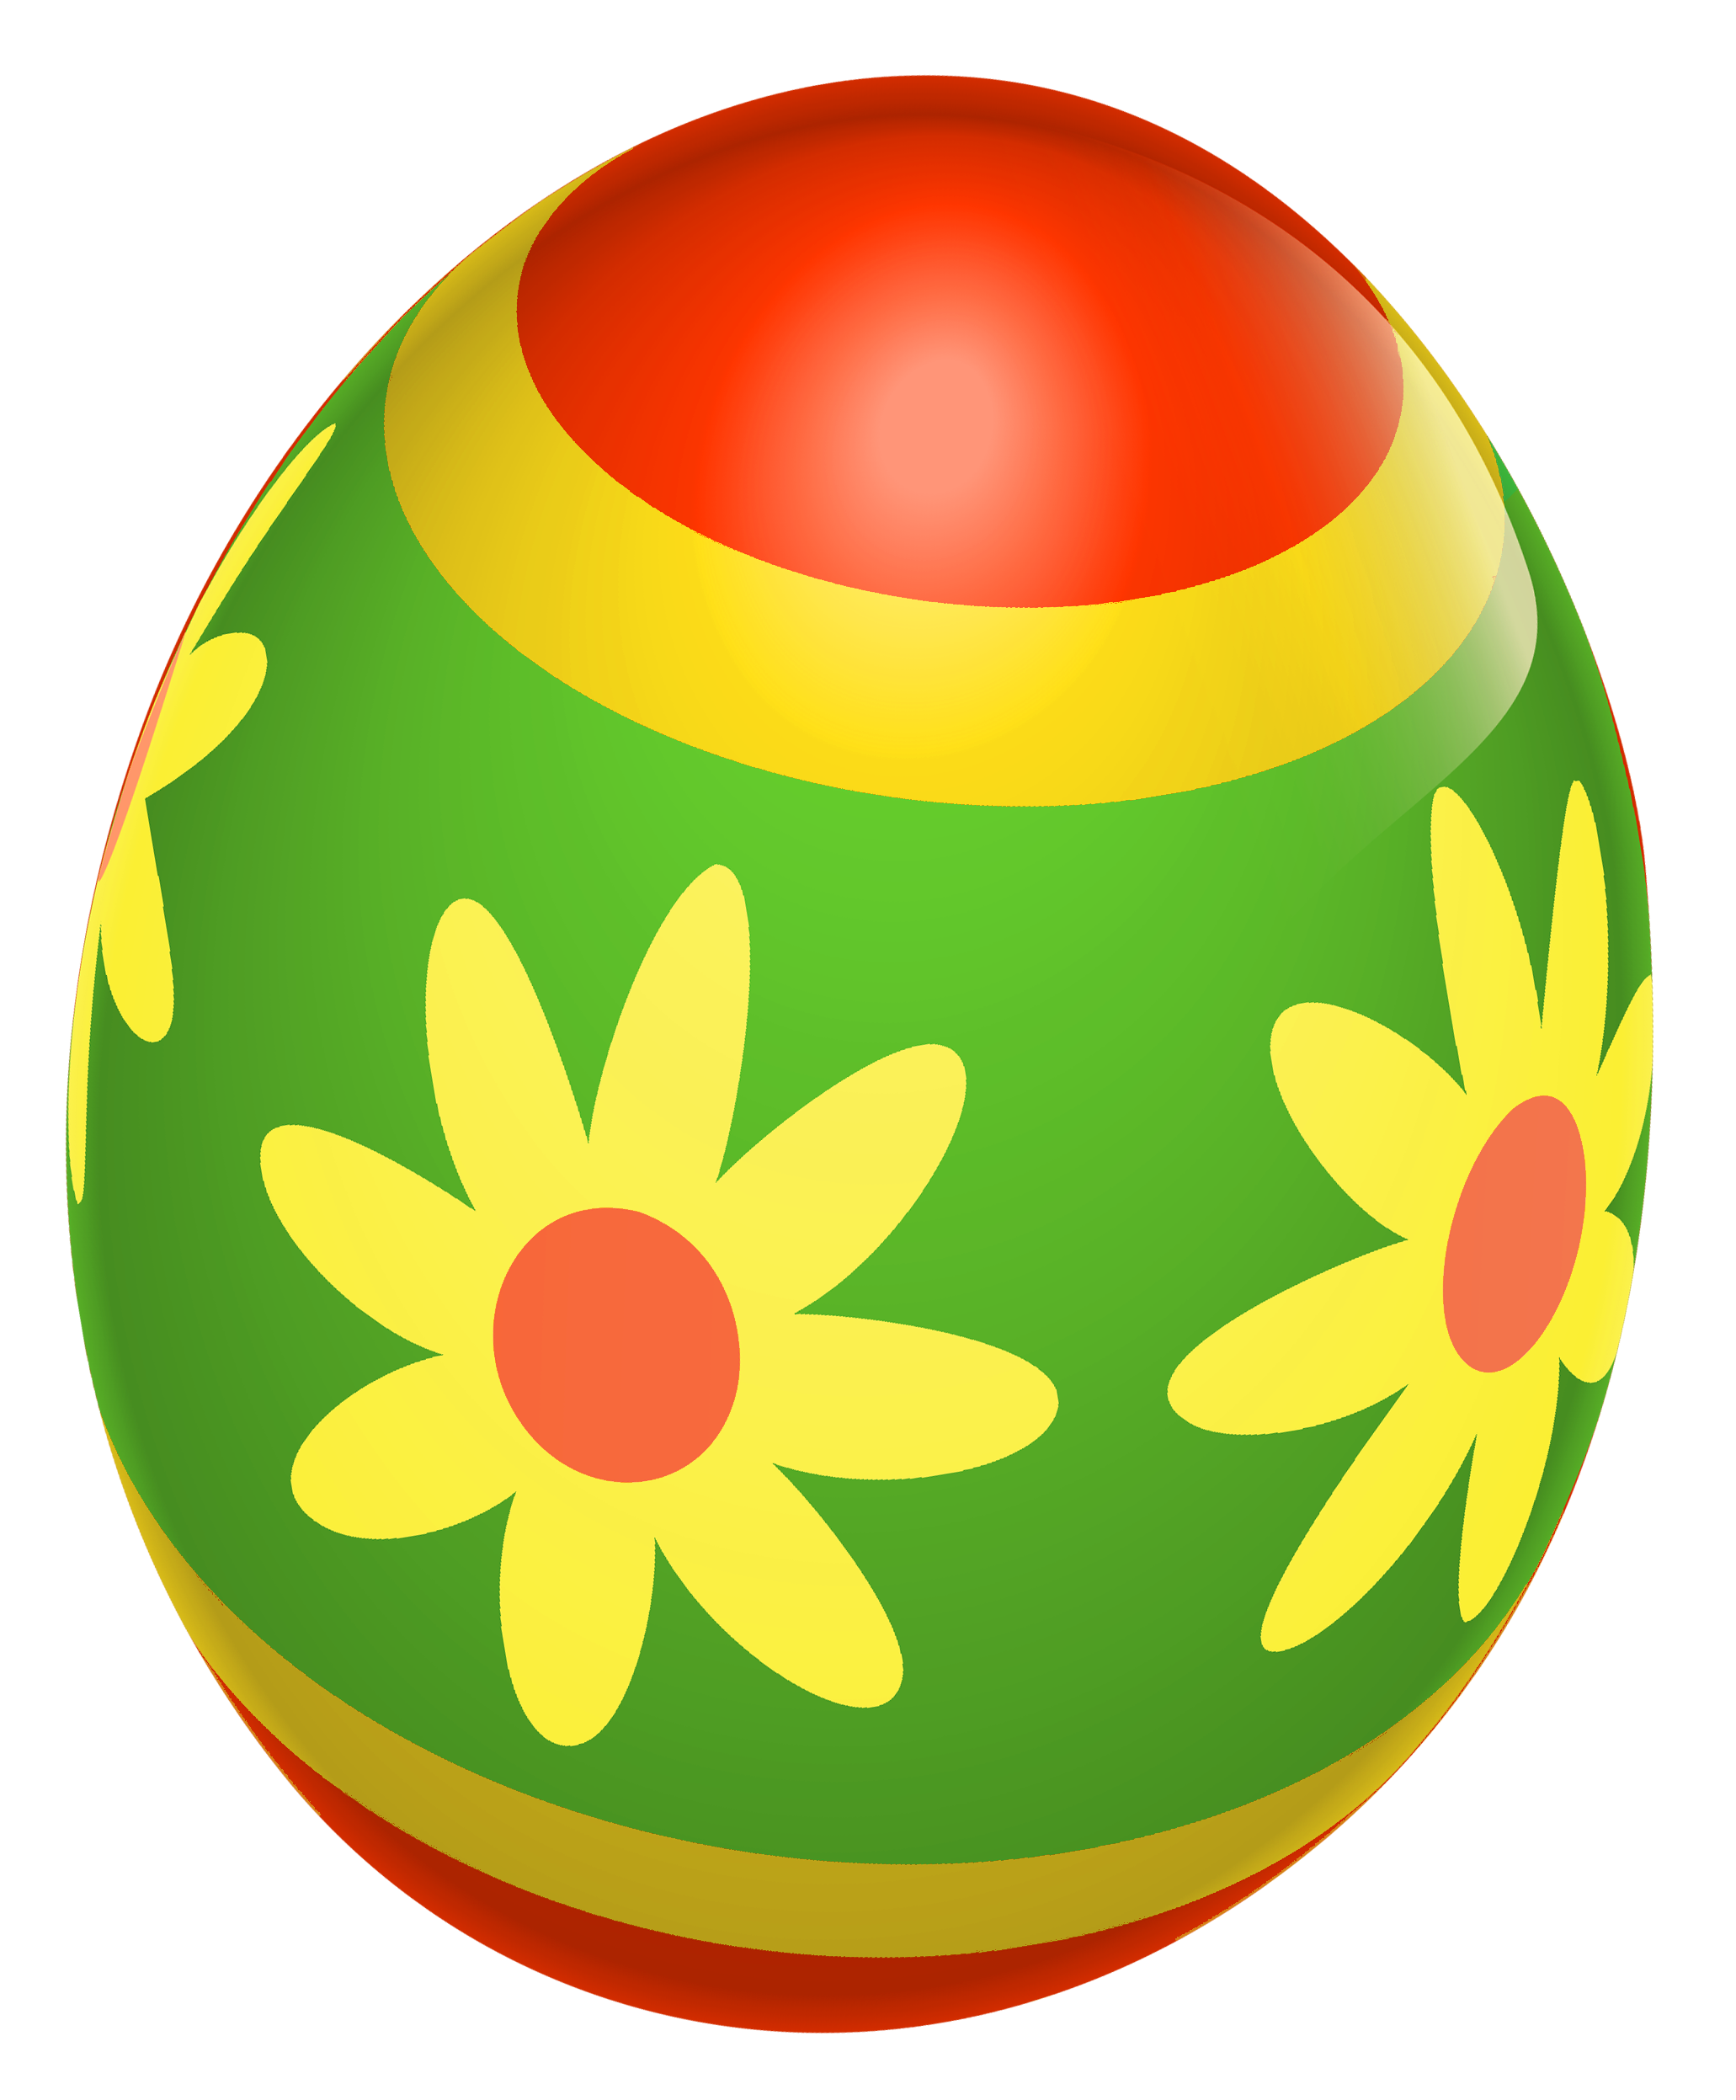 Yellow Dotted Easter Egg PNG Clipart​  Gallery Yopriceville - High-Quality  Free Images and Transparent PNG Clipart